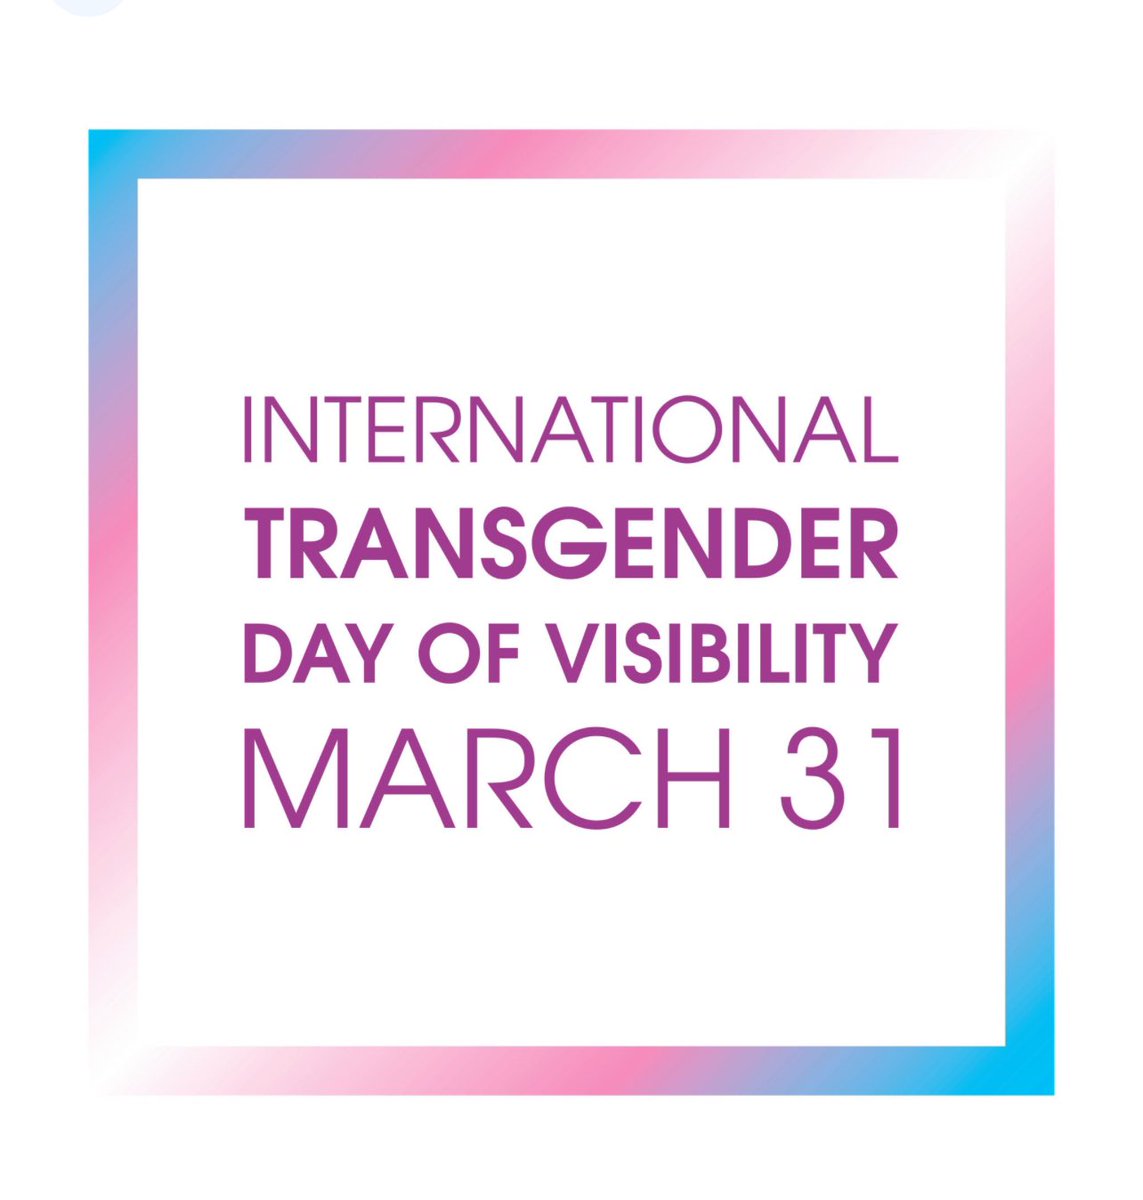 Happy #transdayofvisibility 🩵🩷🤍🩷🩵 To all my trans siblings,- As a fierce trans ally… 🏳️‍⚧️ I see you. 🏳️‍⚧️ I care for you. 🏳️‍⚧️ I’ll do everything in my power to make your voices heard and protect you. 🏳️‍⚧️ I call on others to do the same! 📢✊🏻💕 #tdov #tdov2024 🏳️‍⚧️🏳️‍⚧️🏳️‍⚧️🏳️‍⚧️🏳️‍⚧️🏳️‍⚧️🏳️‍⚧️